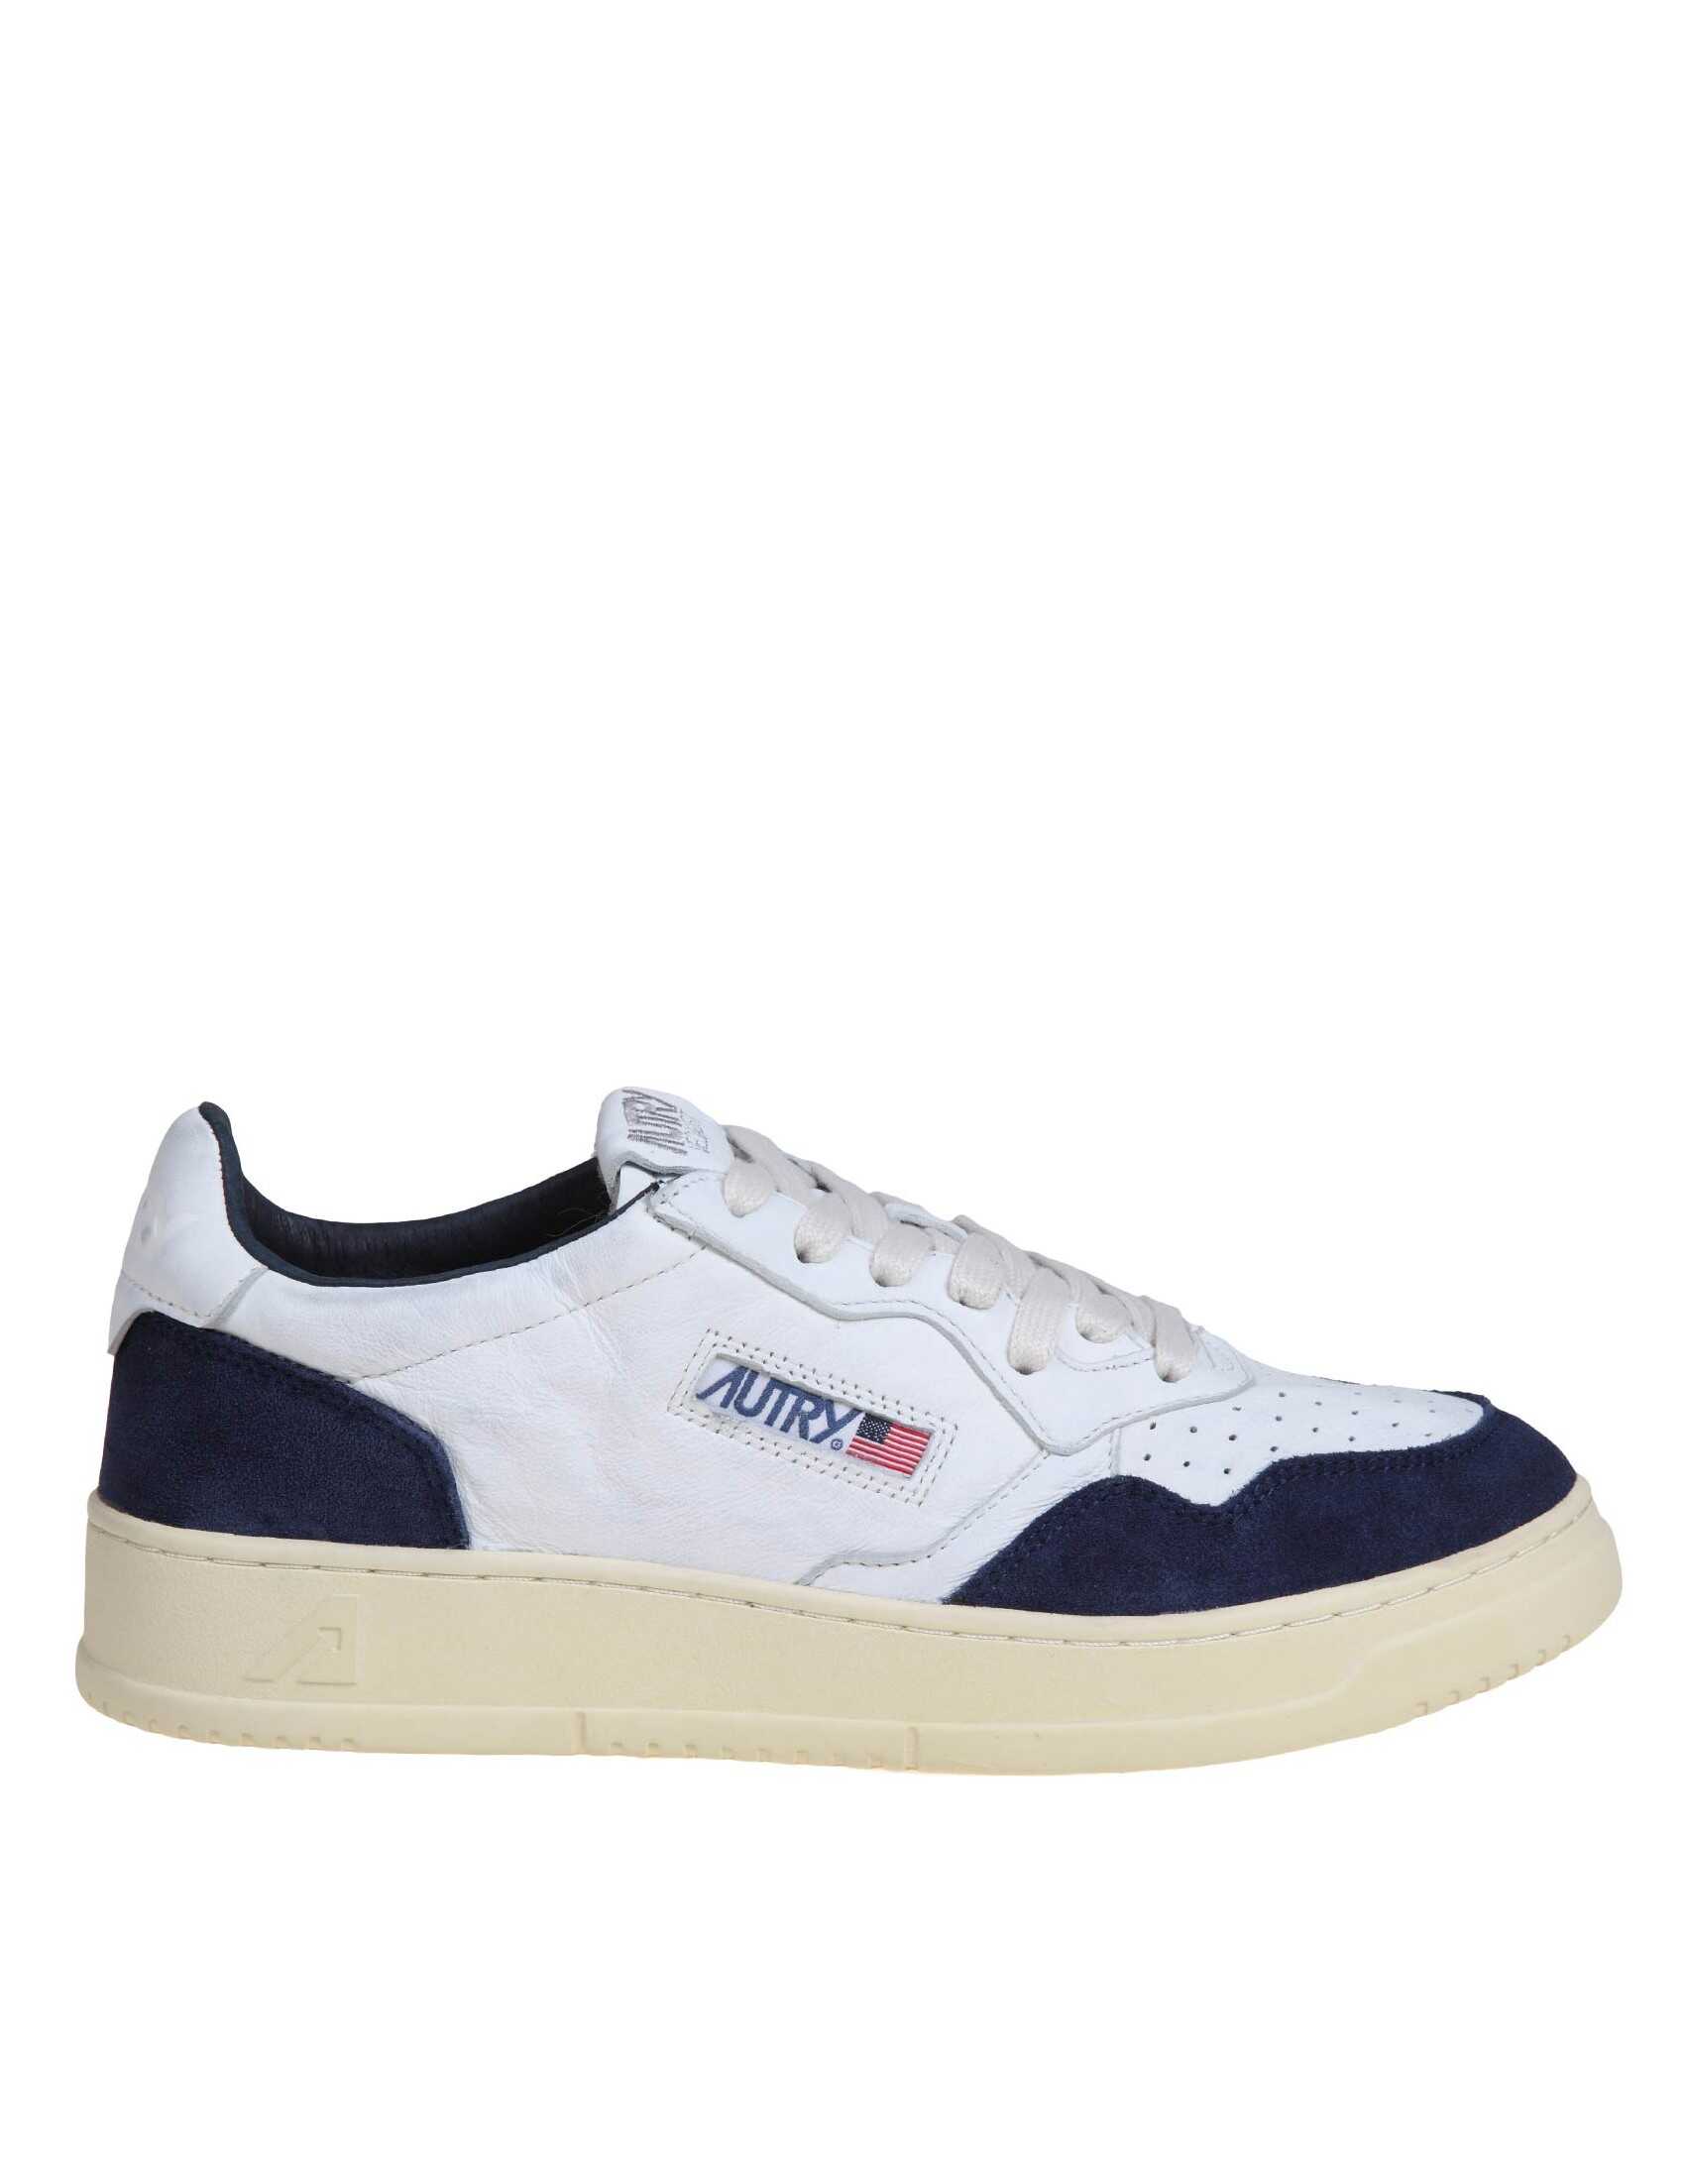 AUTRY Autry medalist sneakers in white and blue leather Blue